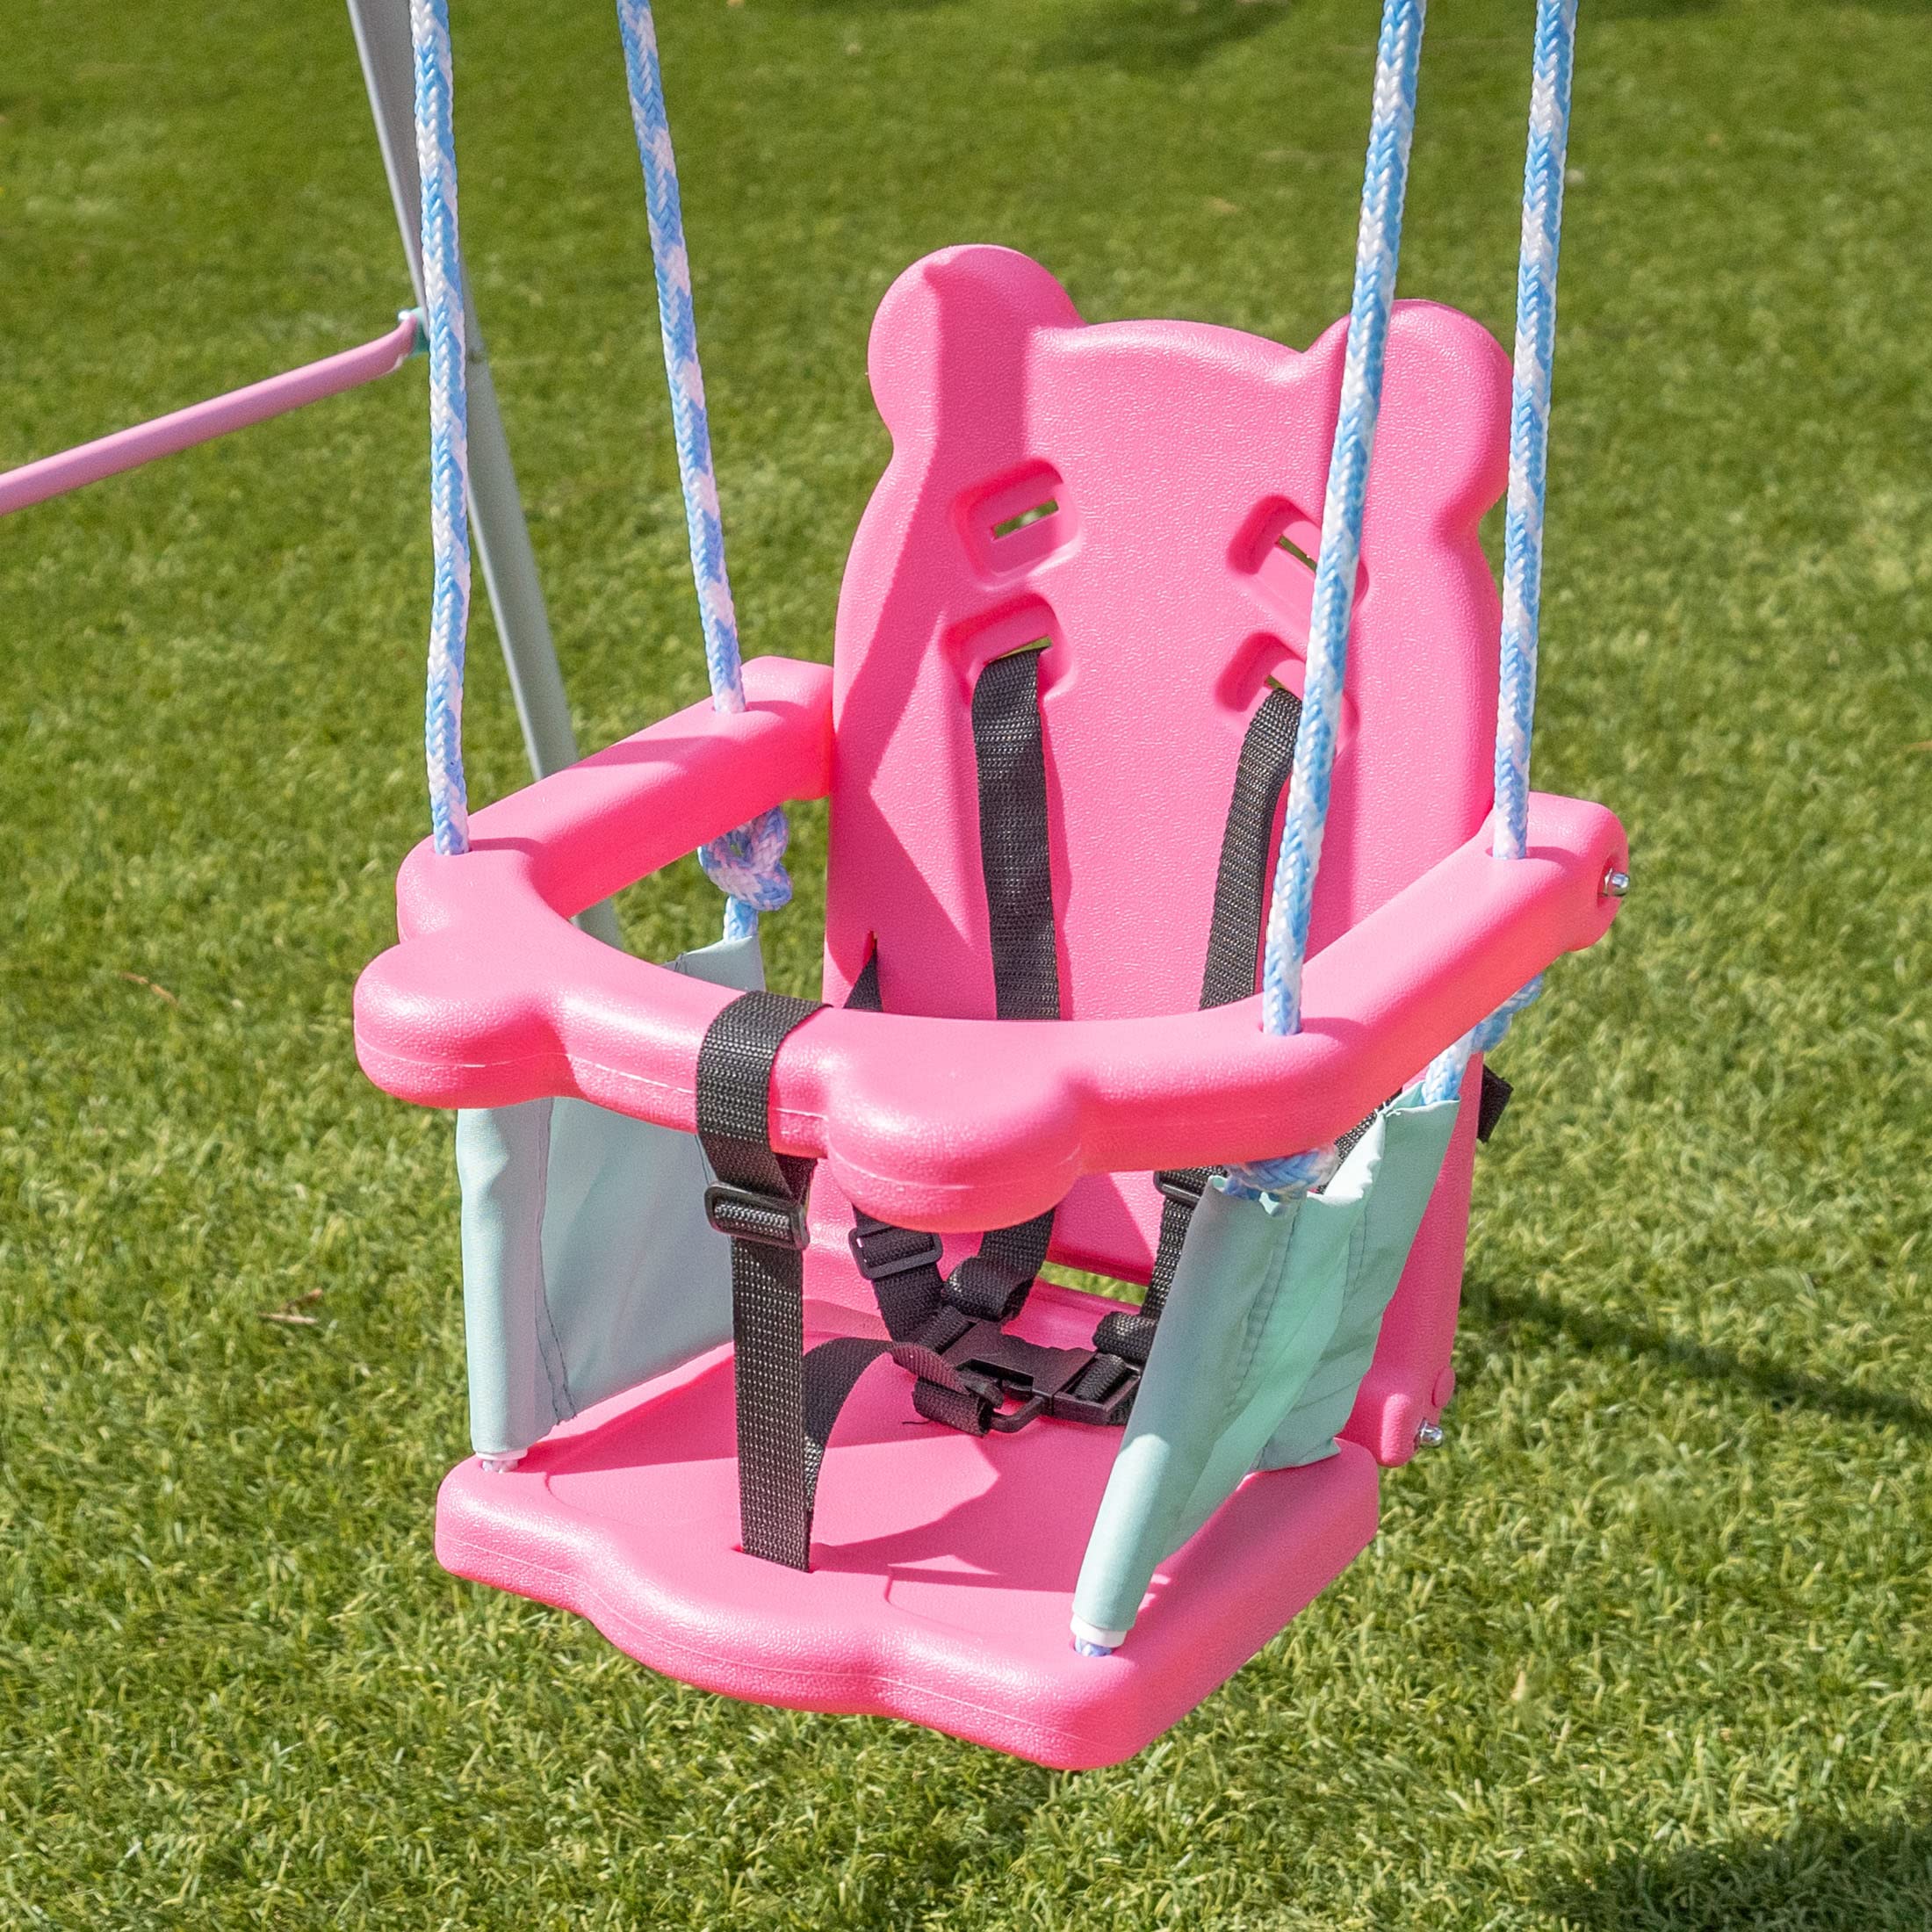 Sportspower FNS-003 My First Toddler Swing: Heavy-Duty Baby Indoor/Outdoor Swing Set with Safety Harness, Capacity - 50 lbs and Ages 9-36 Months, Pink/Pale Green